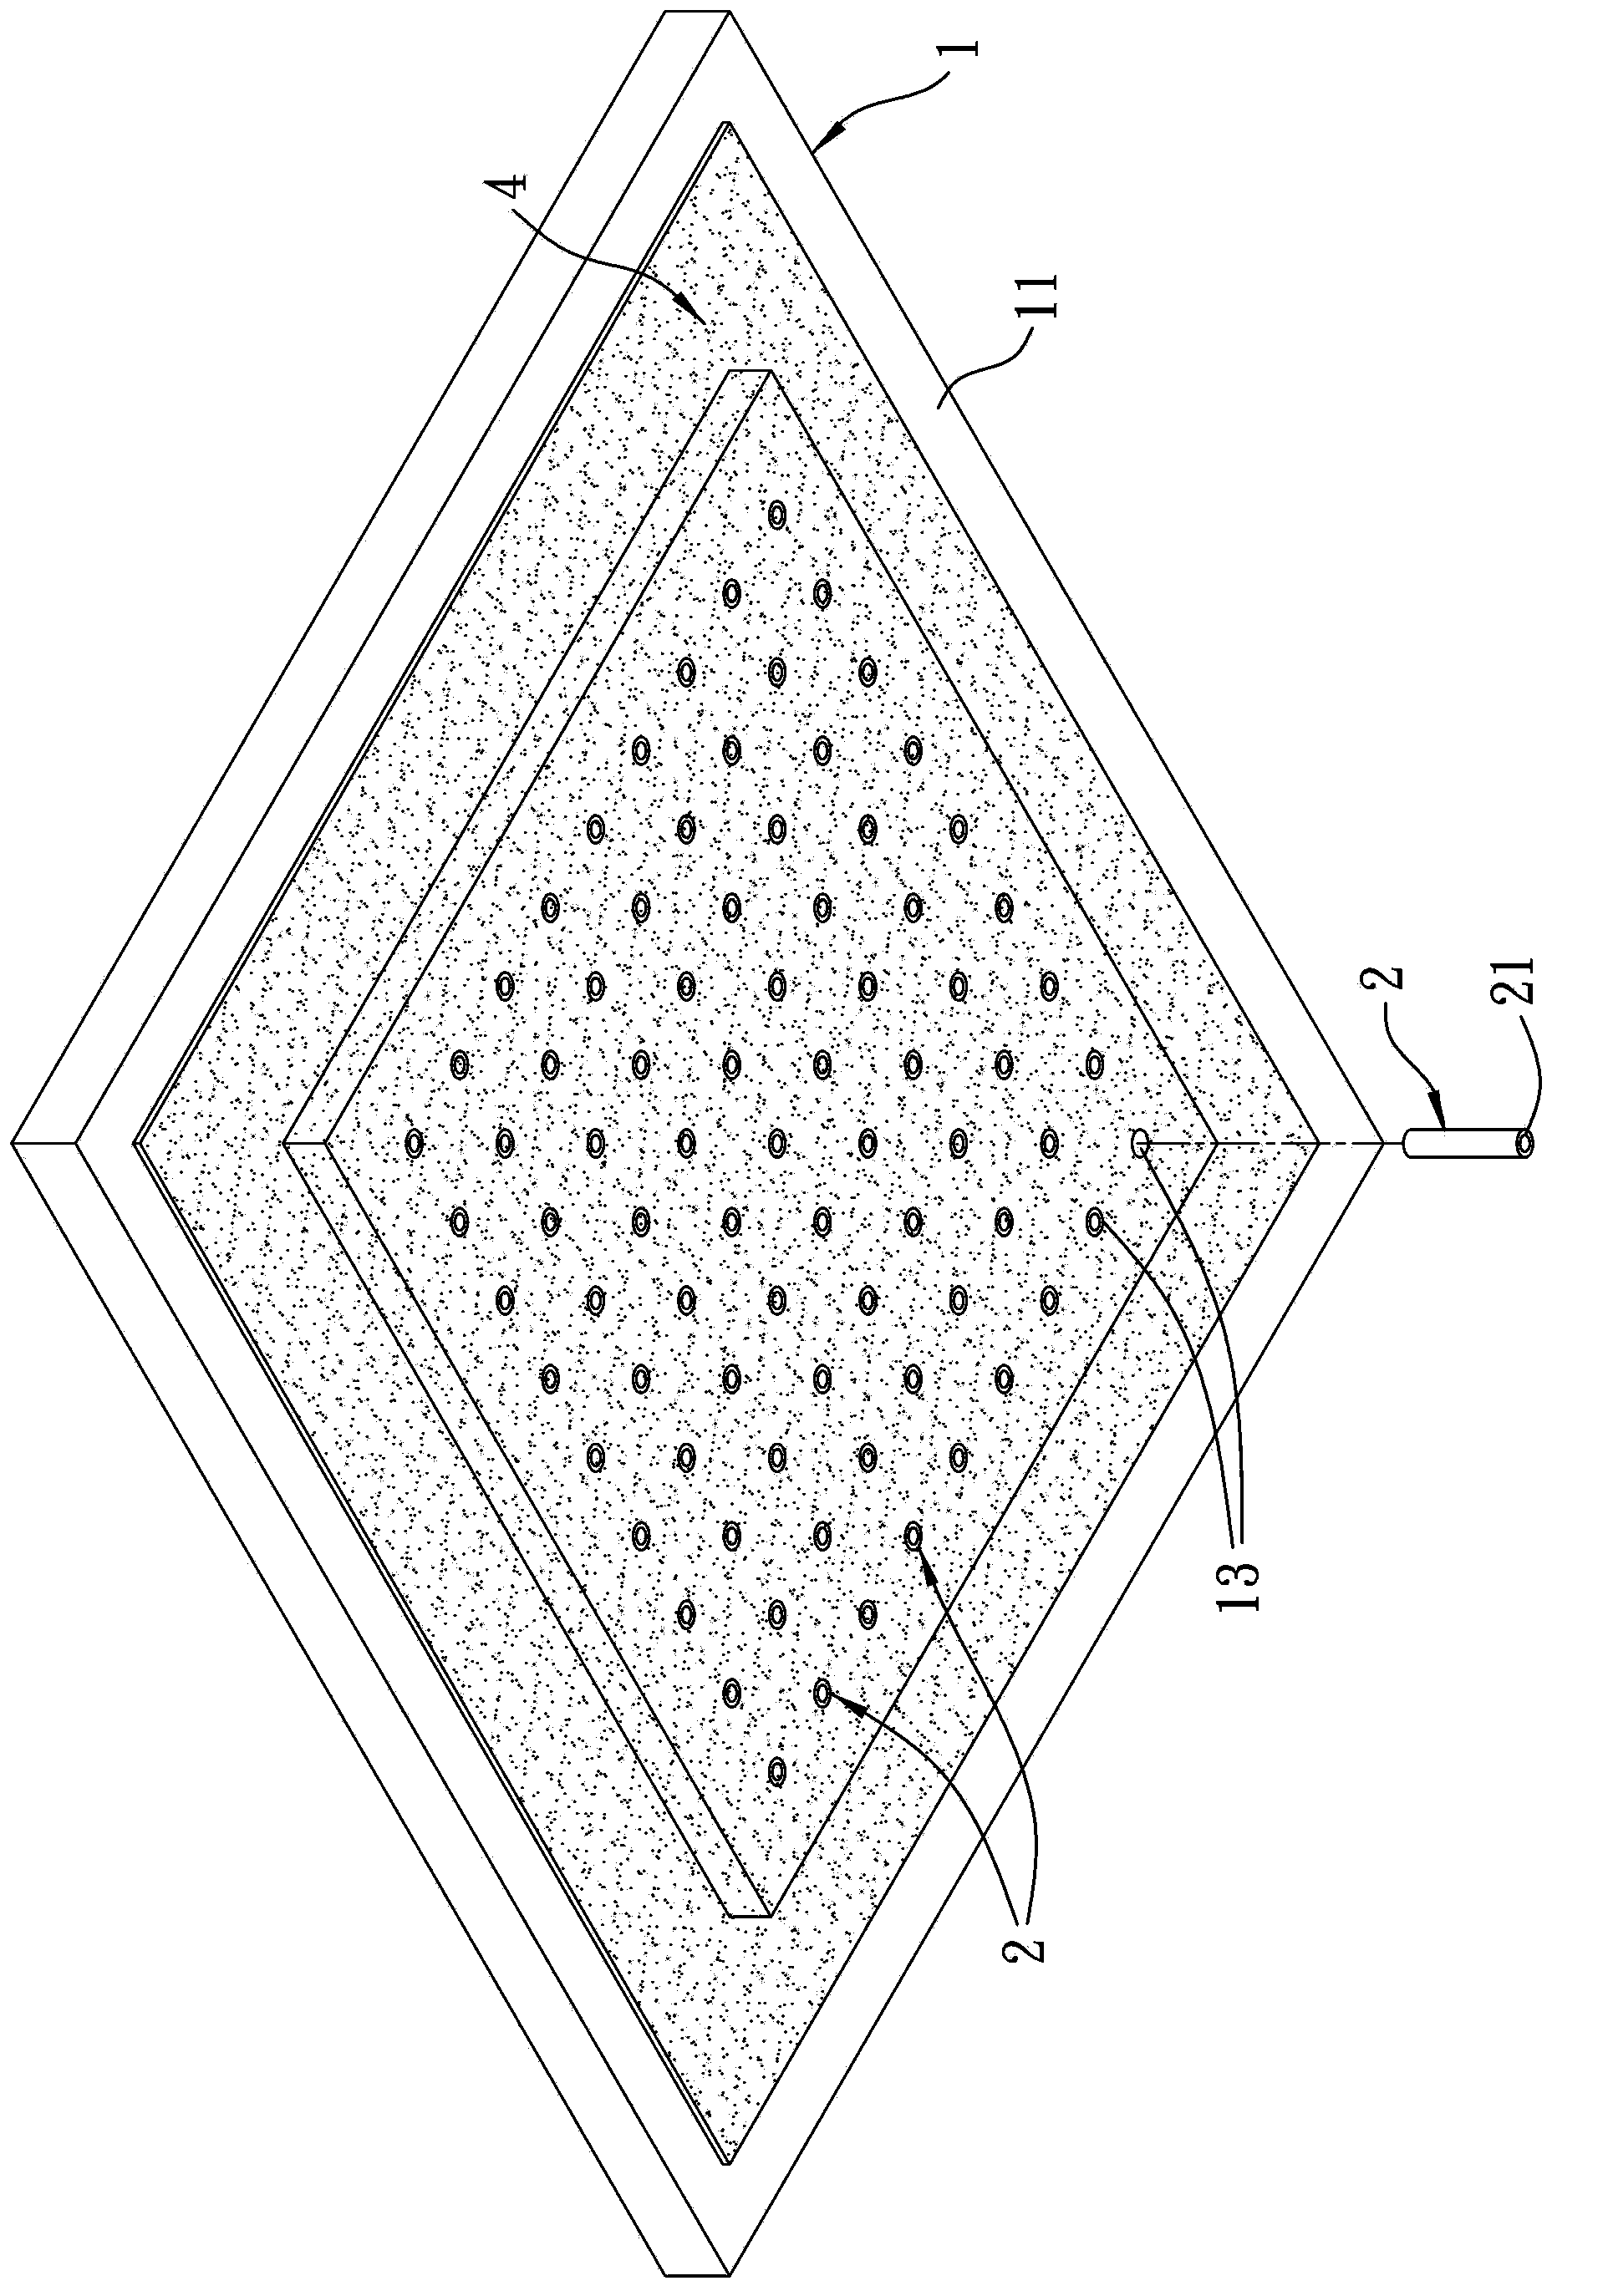 Top electrode of reaction tank device for etching equipment